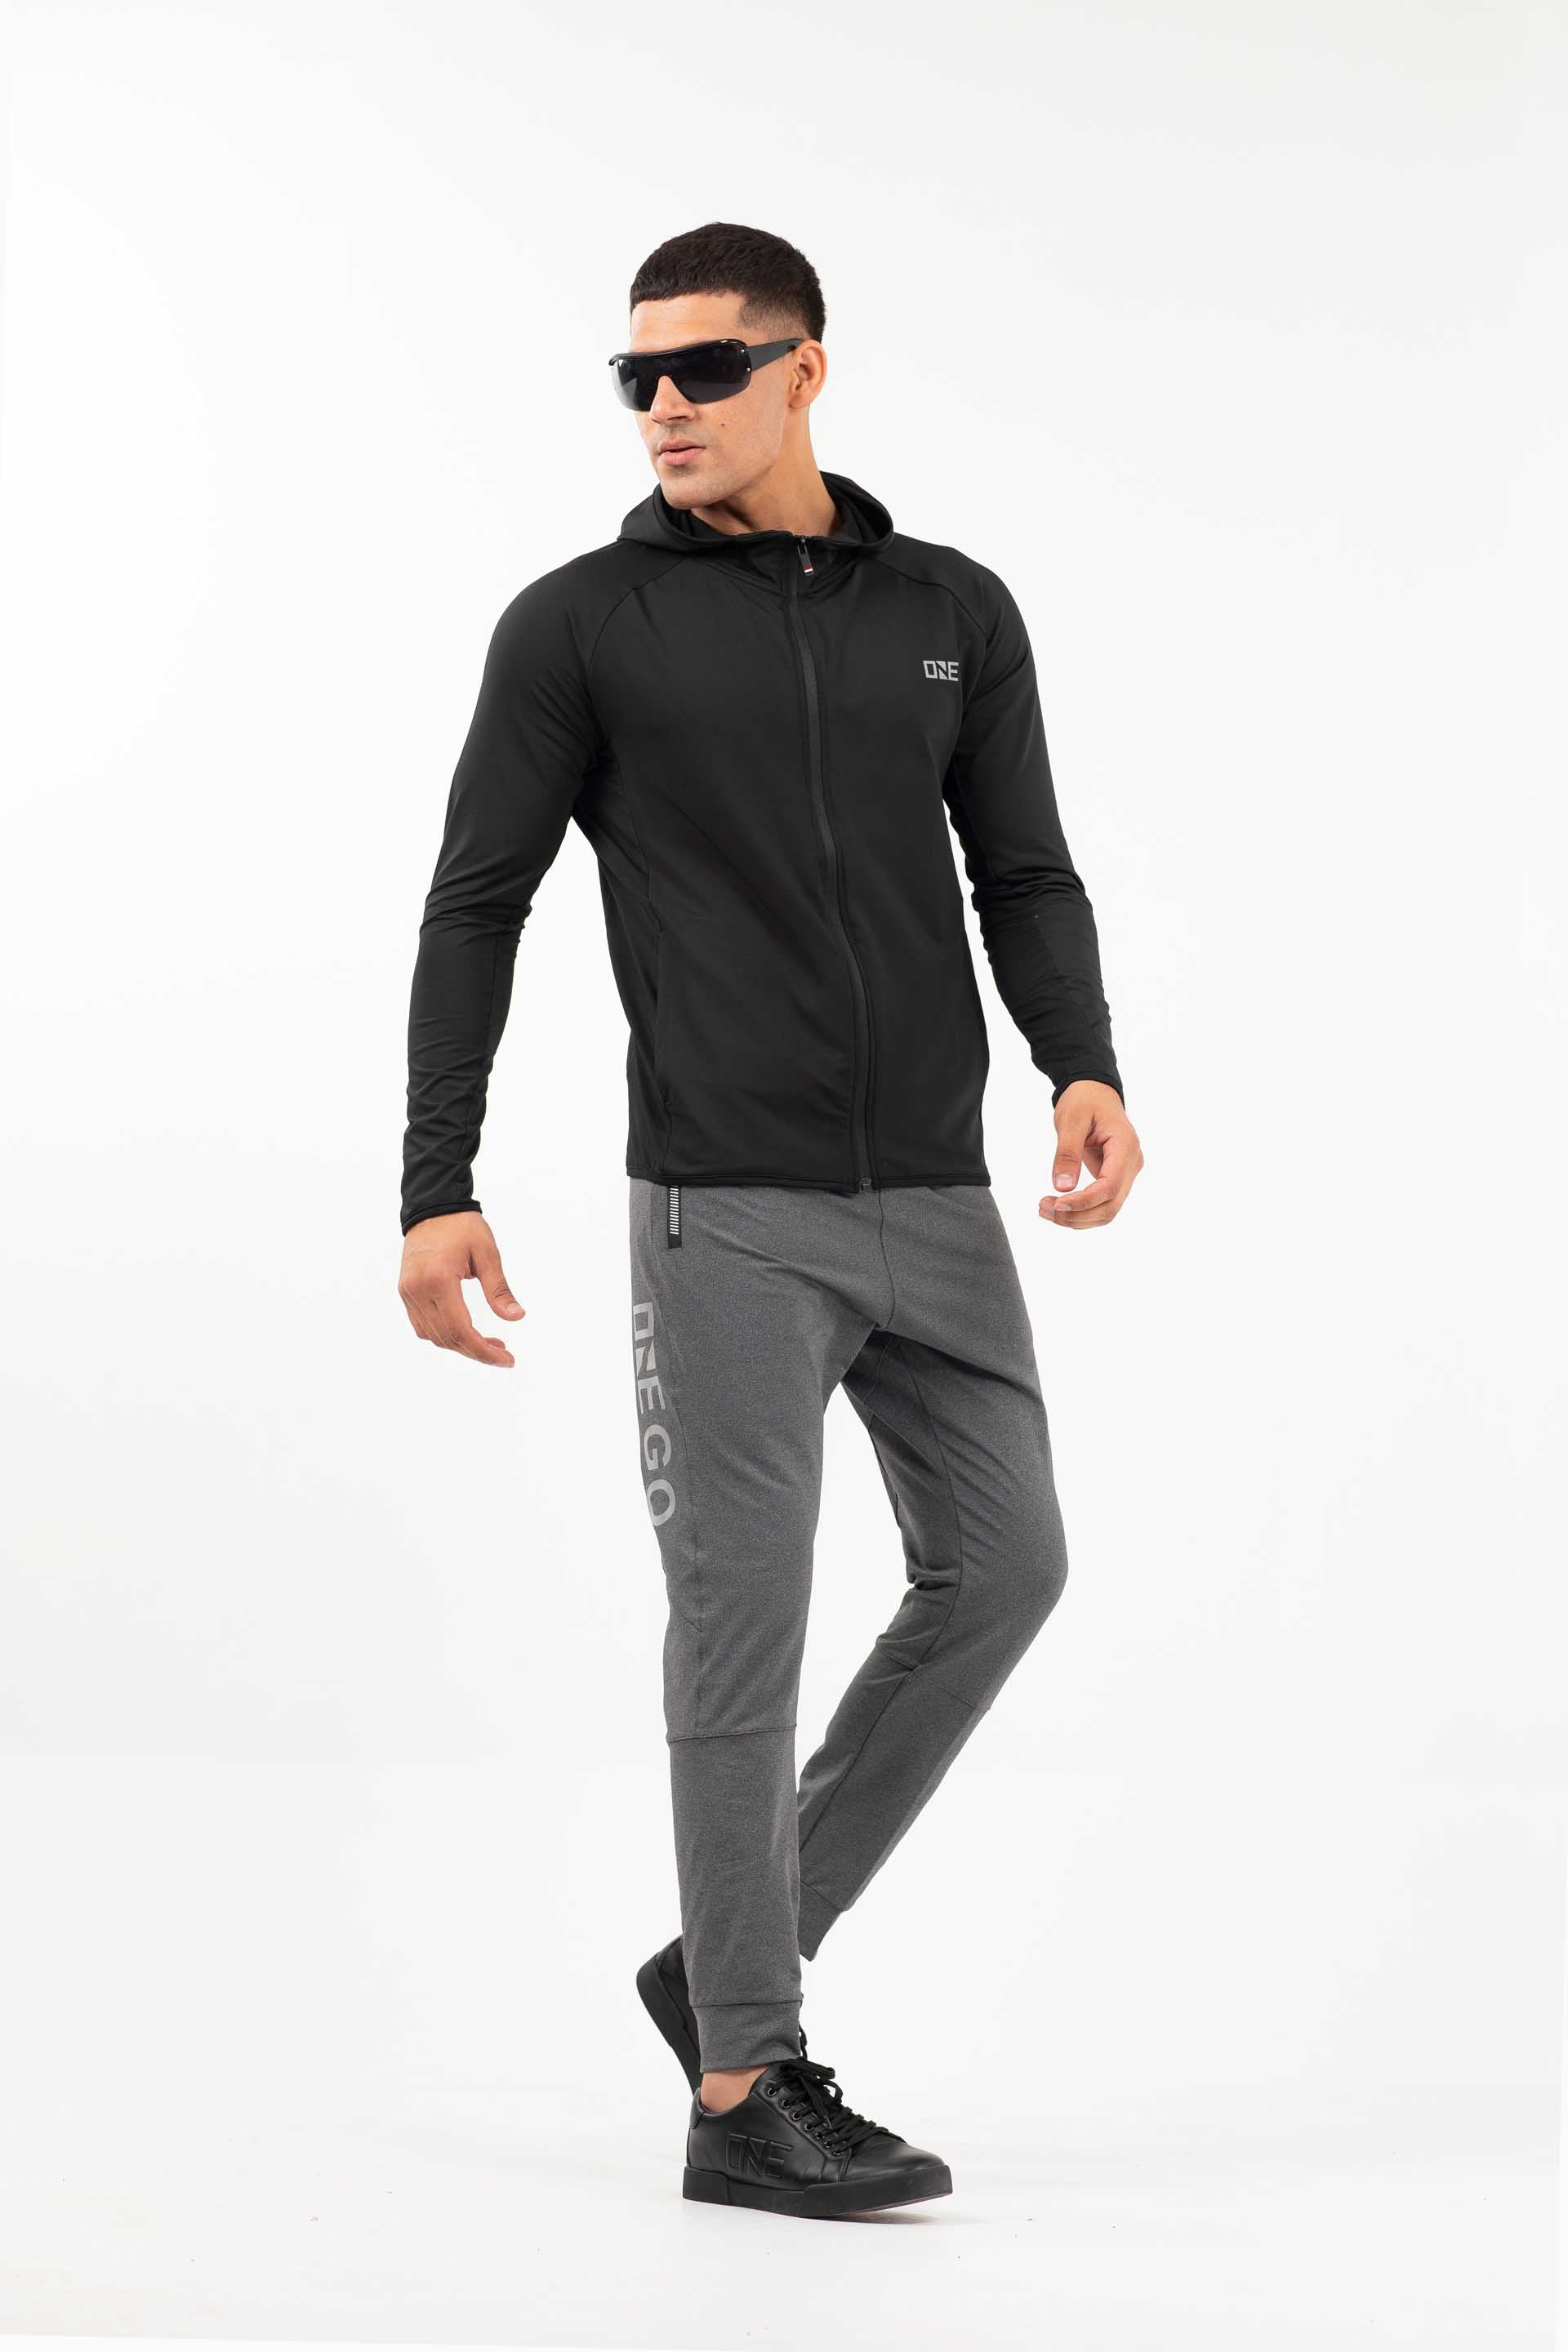 Trouser for men | Browse the perfect gym trousers online in Pakistan – ONE